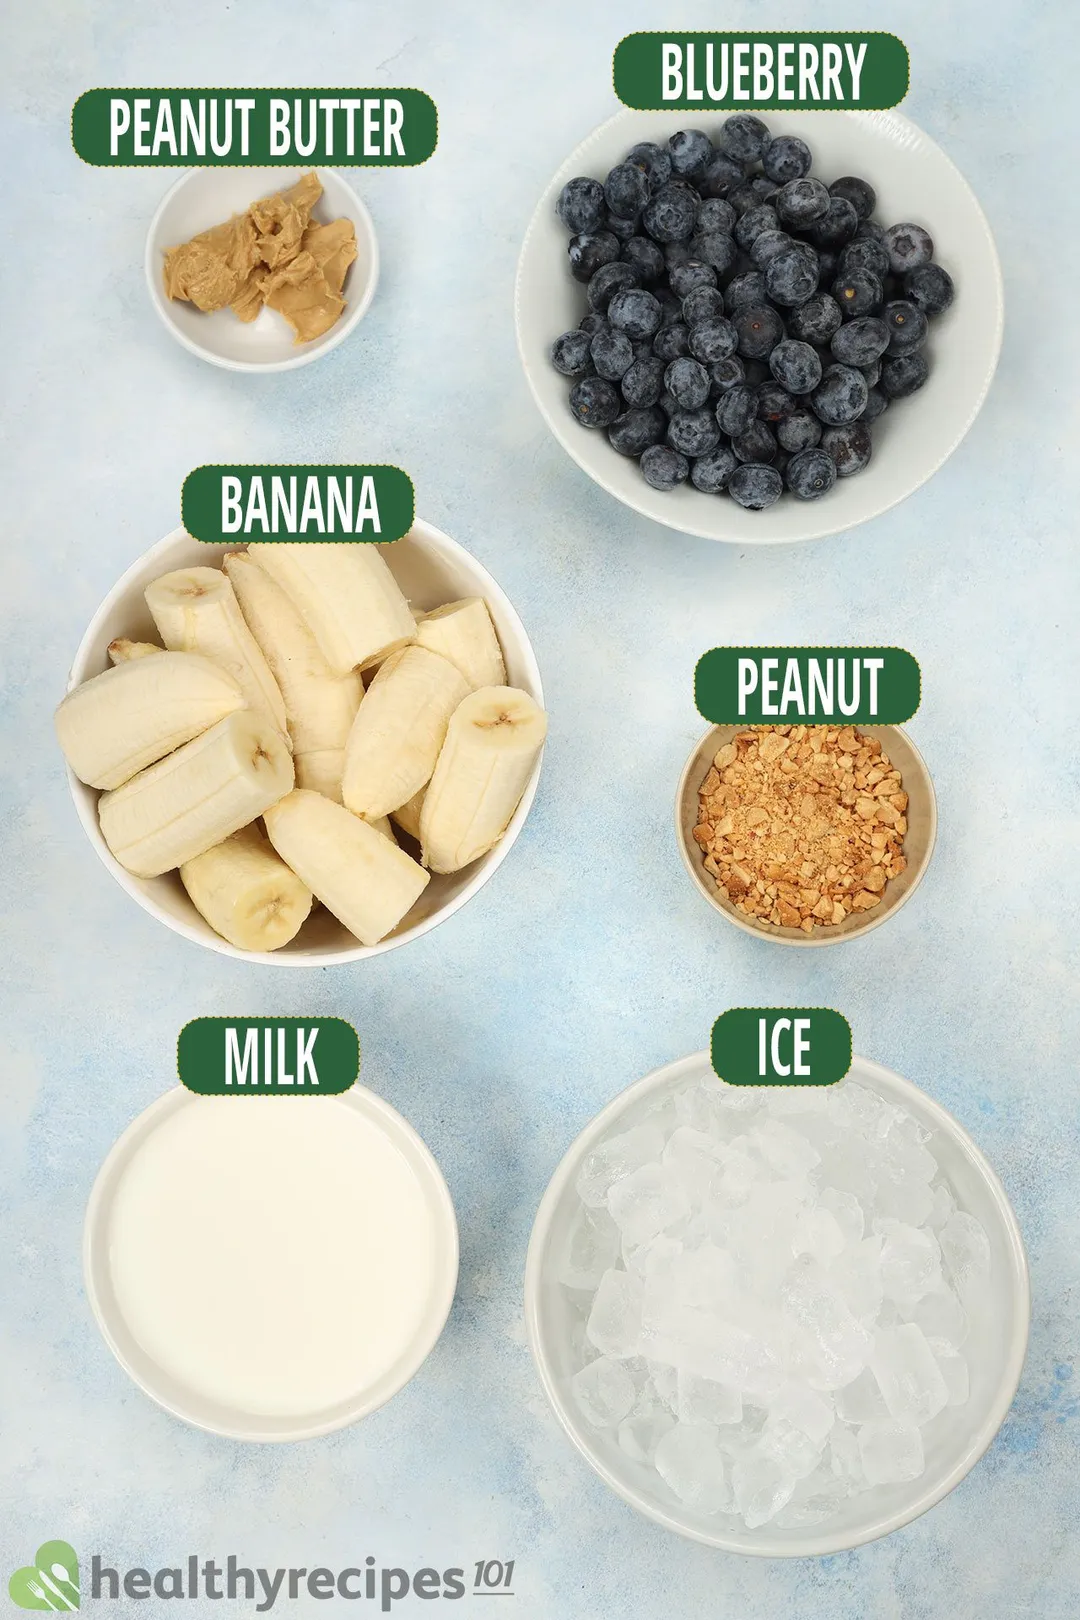 Ingredients in separate bowls: peanut butter, blueberries, cut bananas, crushed peanuts, milk, and ice nuggets